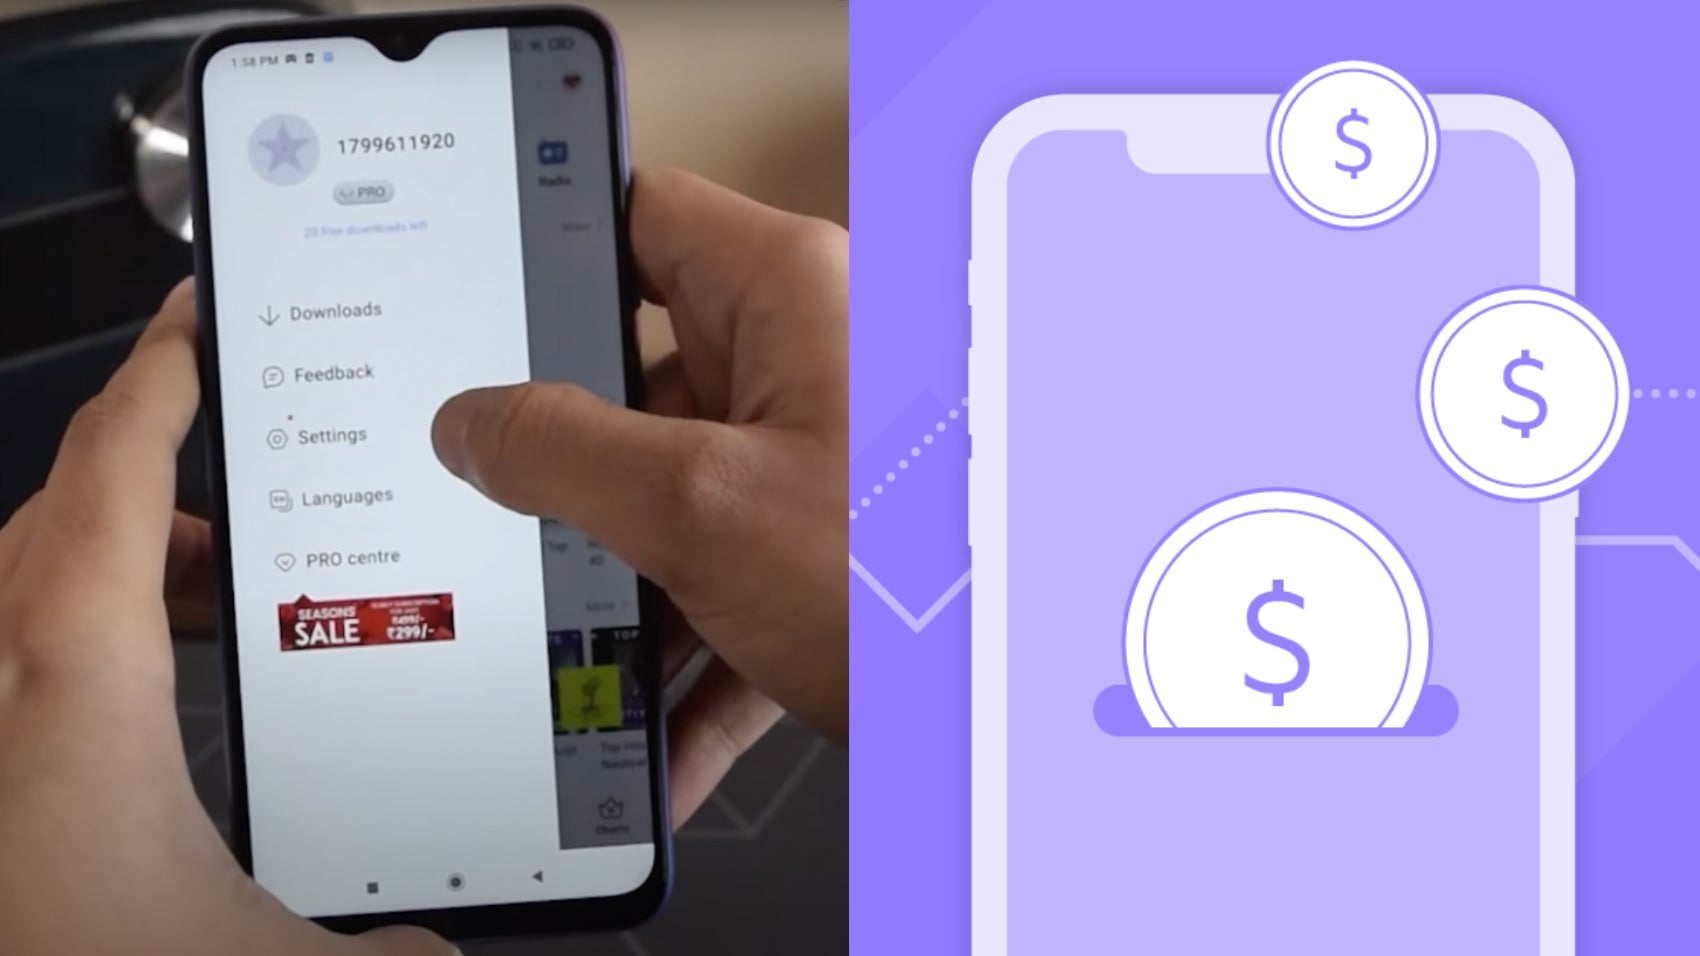 Inflation! Could Apple and Samsung bring ads to your iPhone and Android or make you subscribe to it?